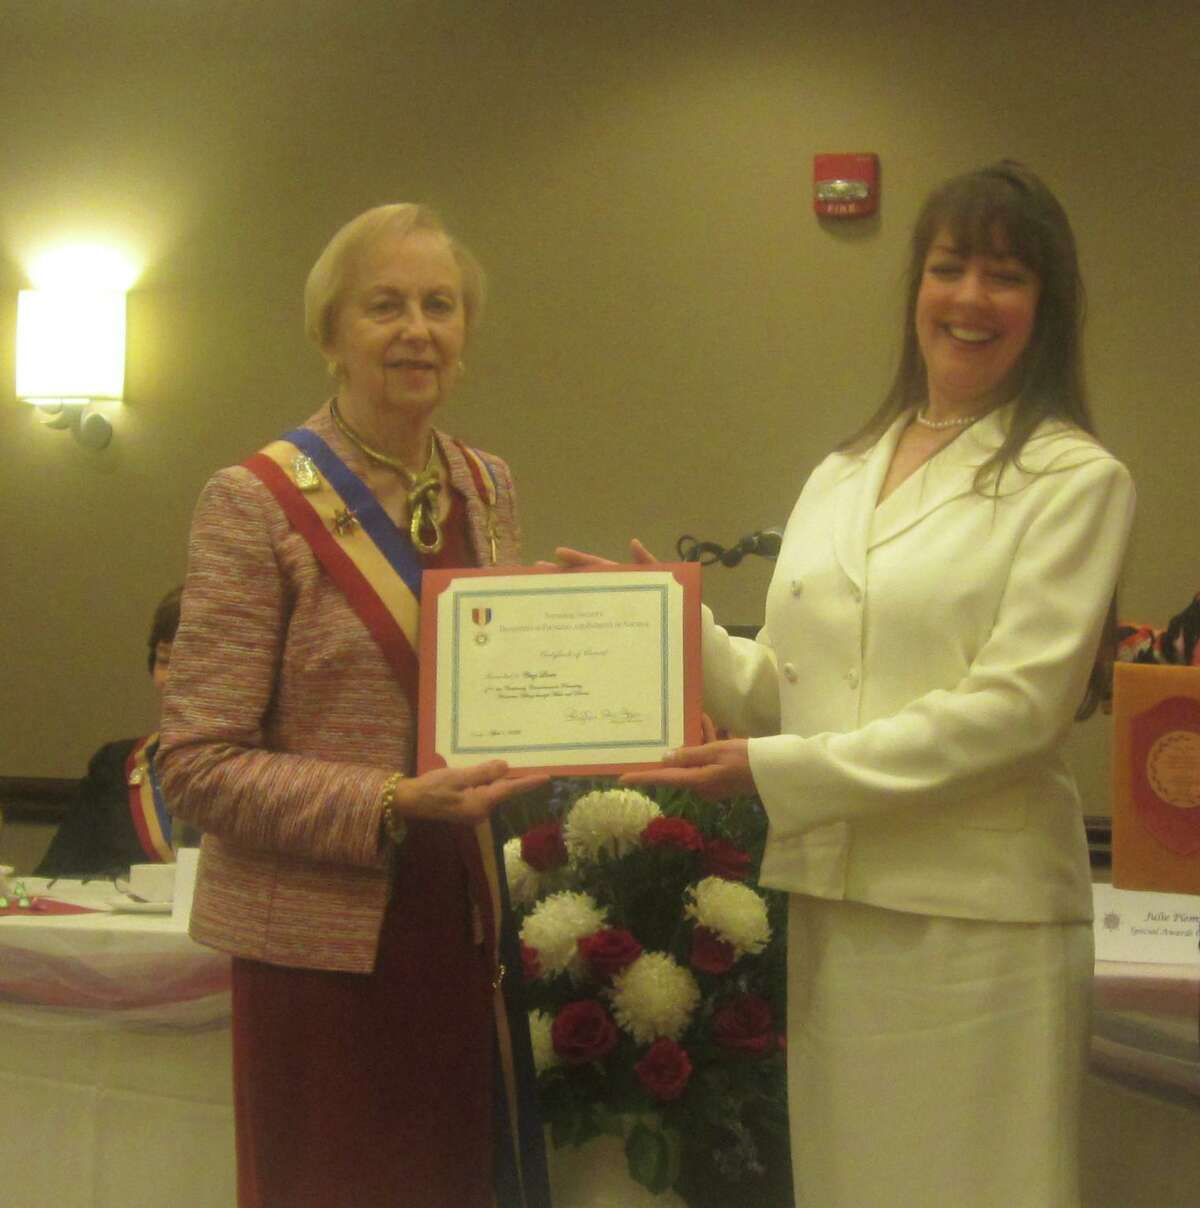 Winsted-based composer Cinzi Lavin was honored by the National Society Daughters of Founders and Patriots of America.